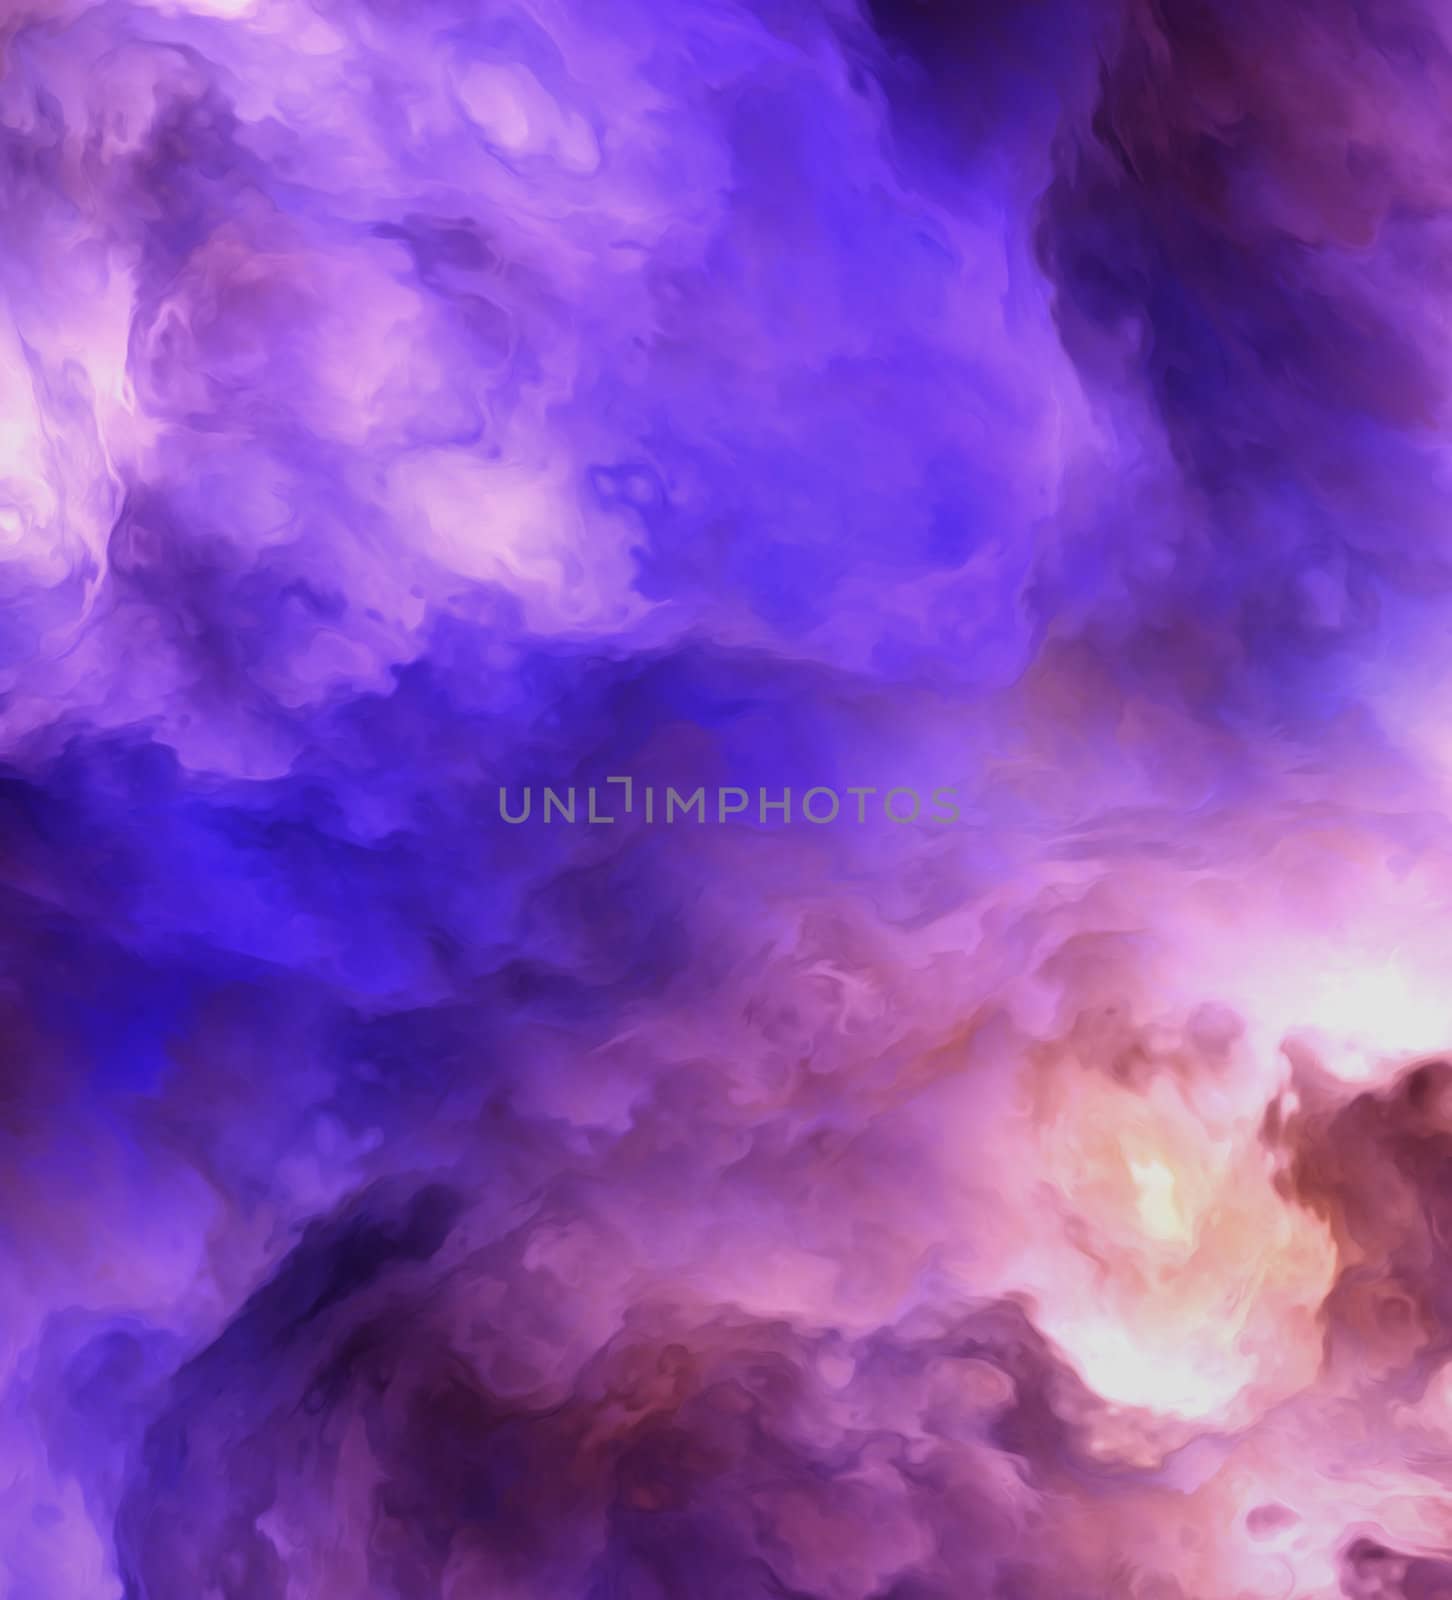 Backlit surreal, stormy clouds shading from dark purples and reds to light blues and yellows symbolizing a range of concepts such as creation, the birth of stars, or an ominous maelstrom.